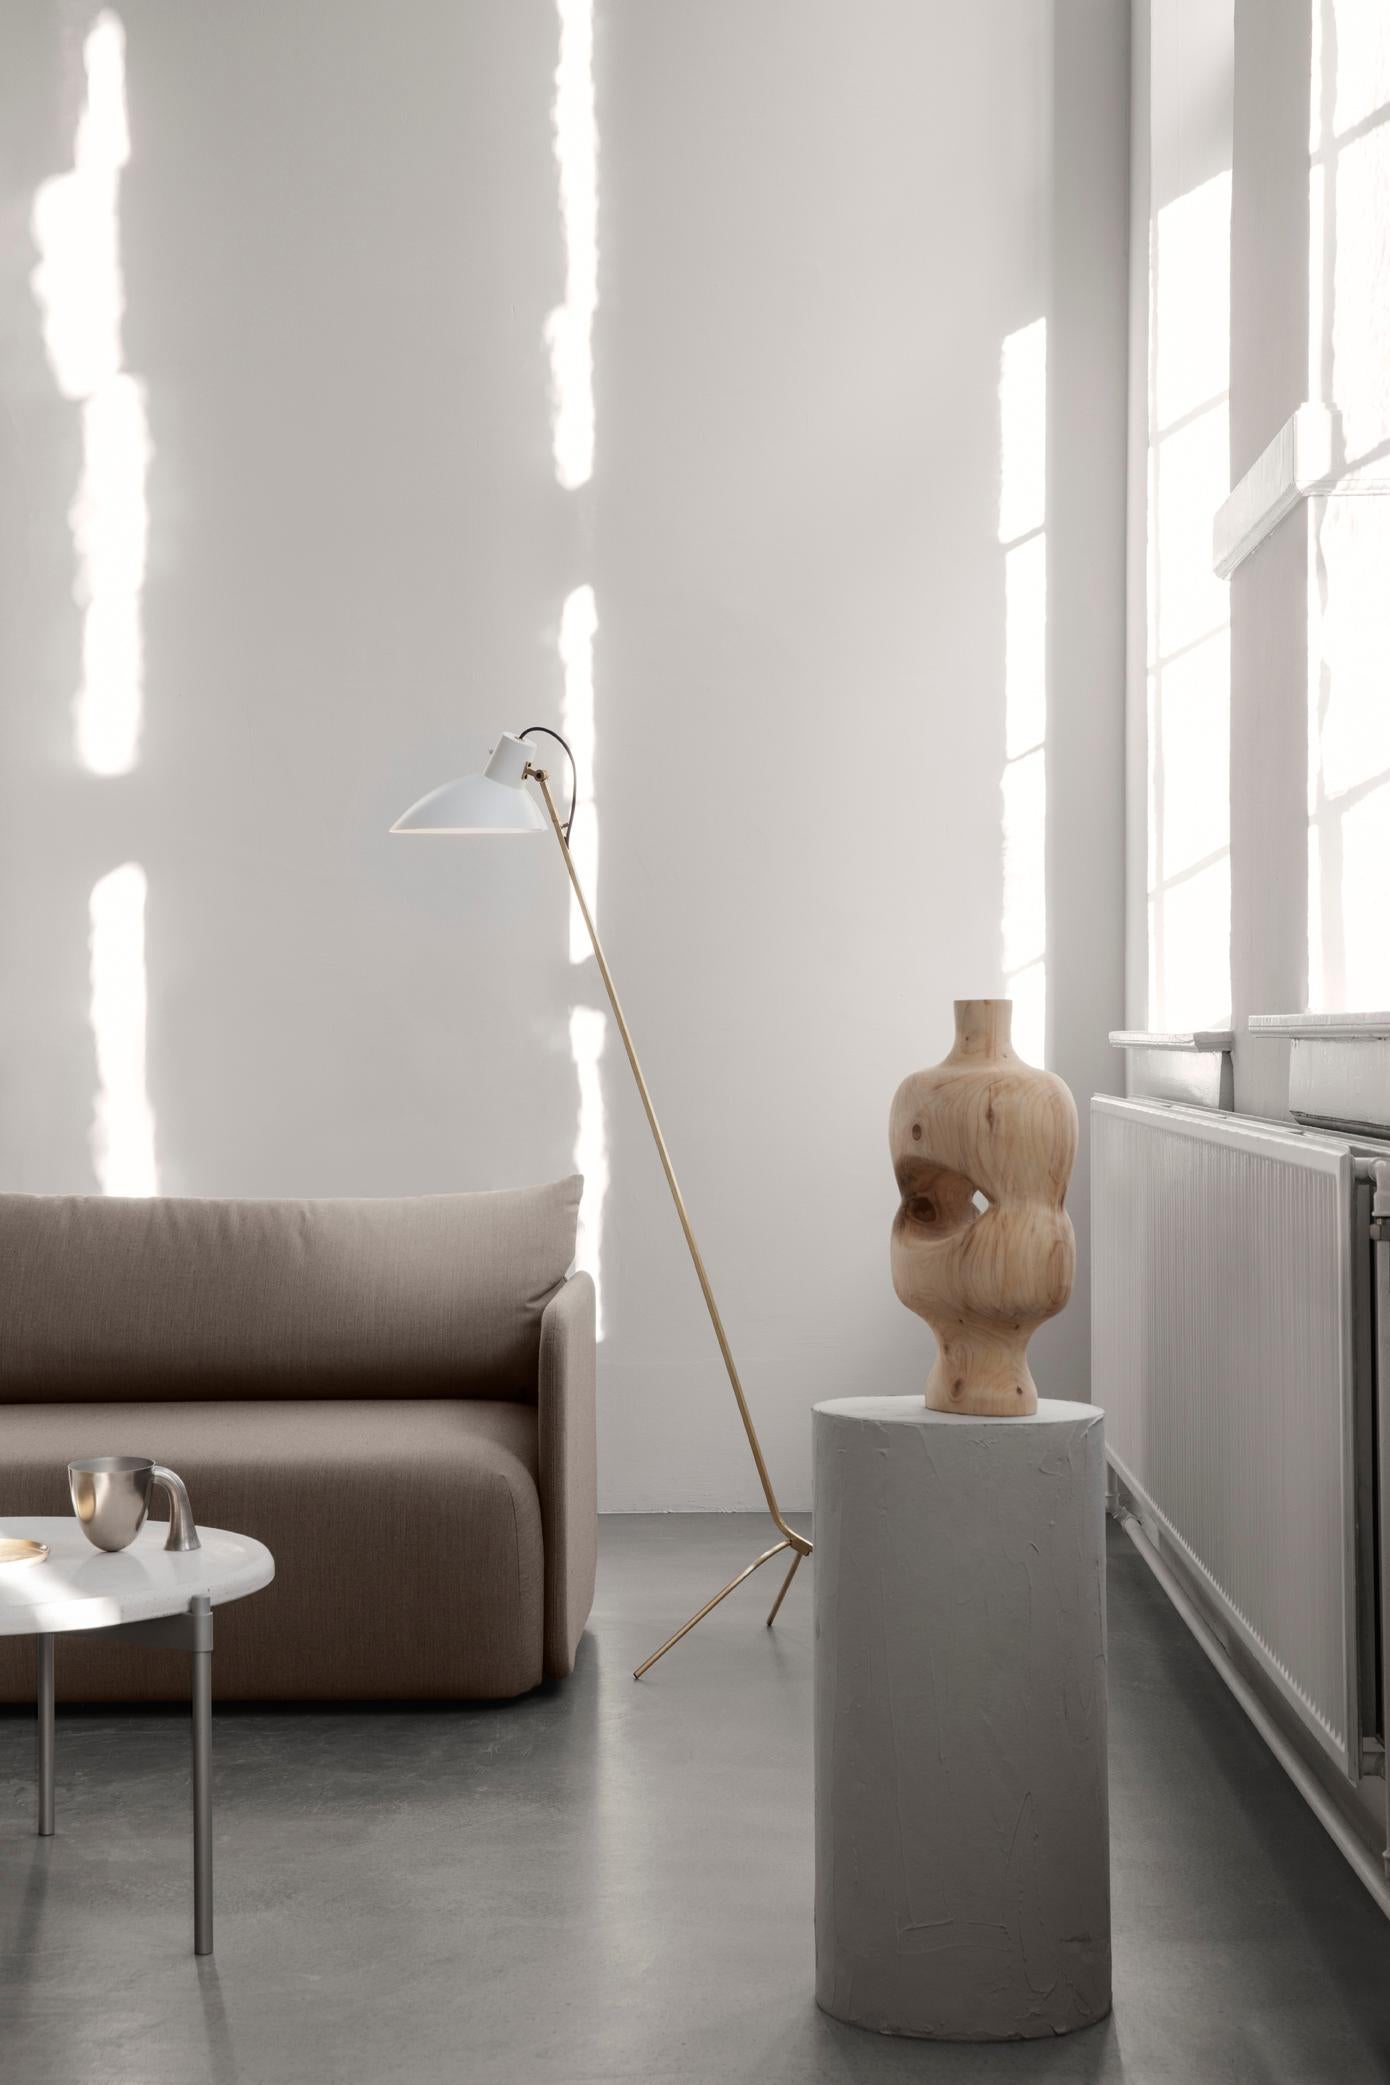 Italian VV Cinquanta White and Brass Floor Lamp Designed by Vittoriano Viganò for Astep